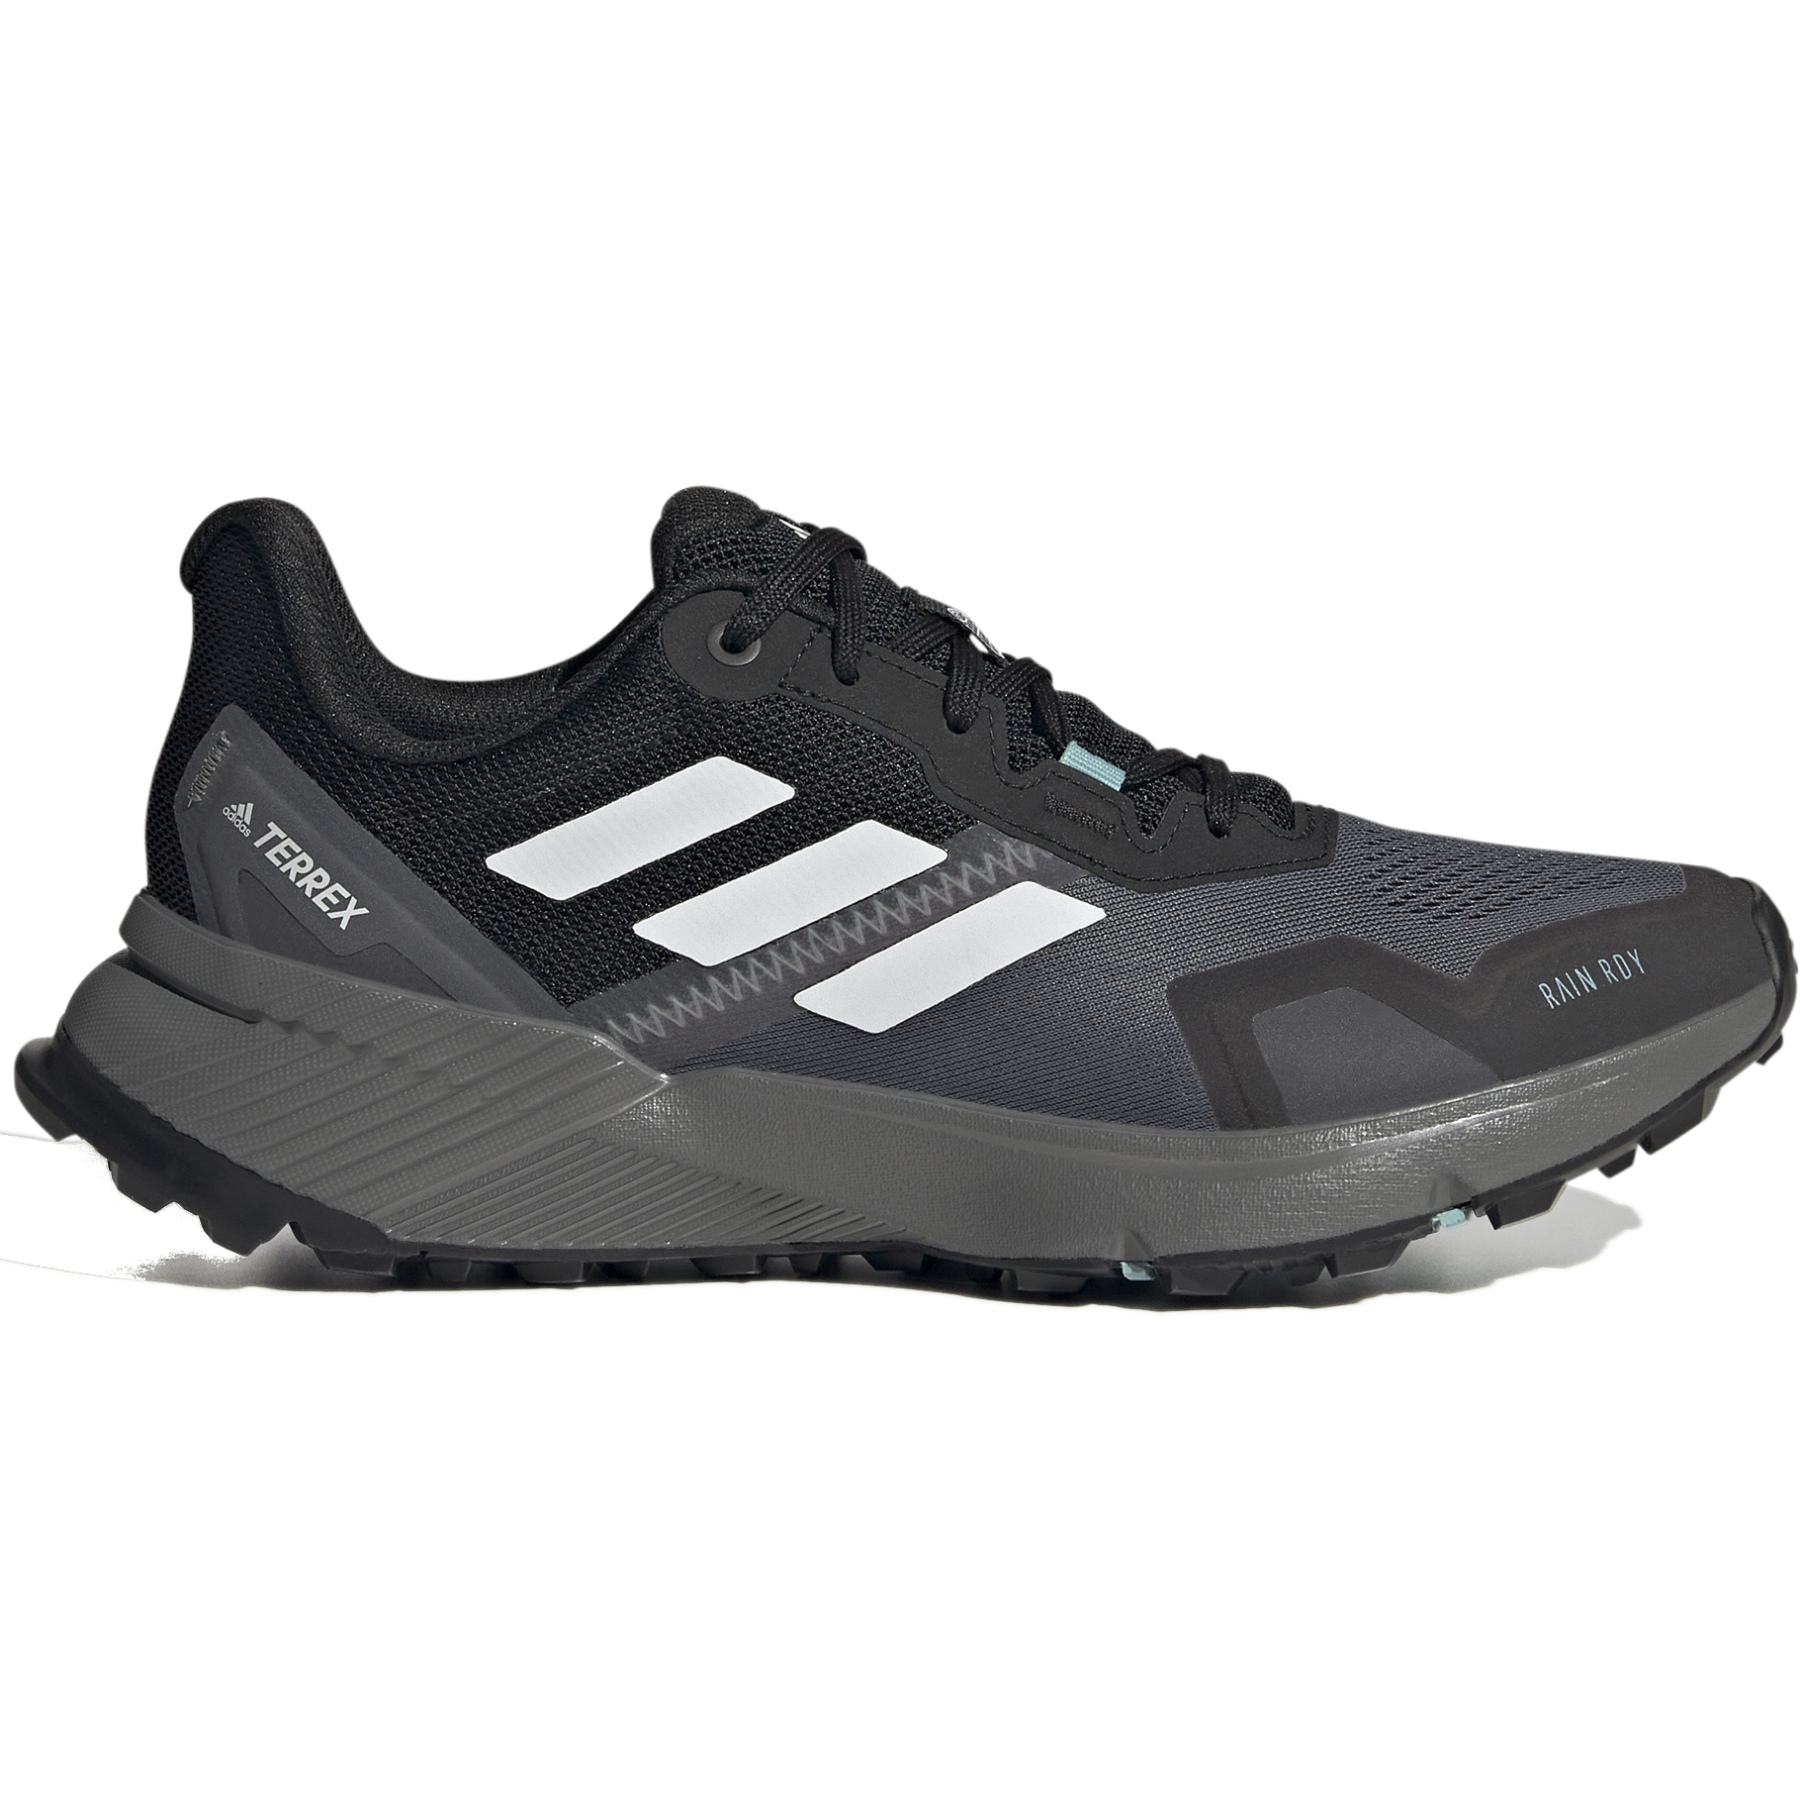 Image of adidas Women's TERREX Soulstride R.RDY Trailrunning Shoes - core black/crystal white/mint ton FZ3045